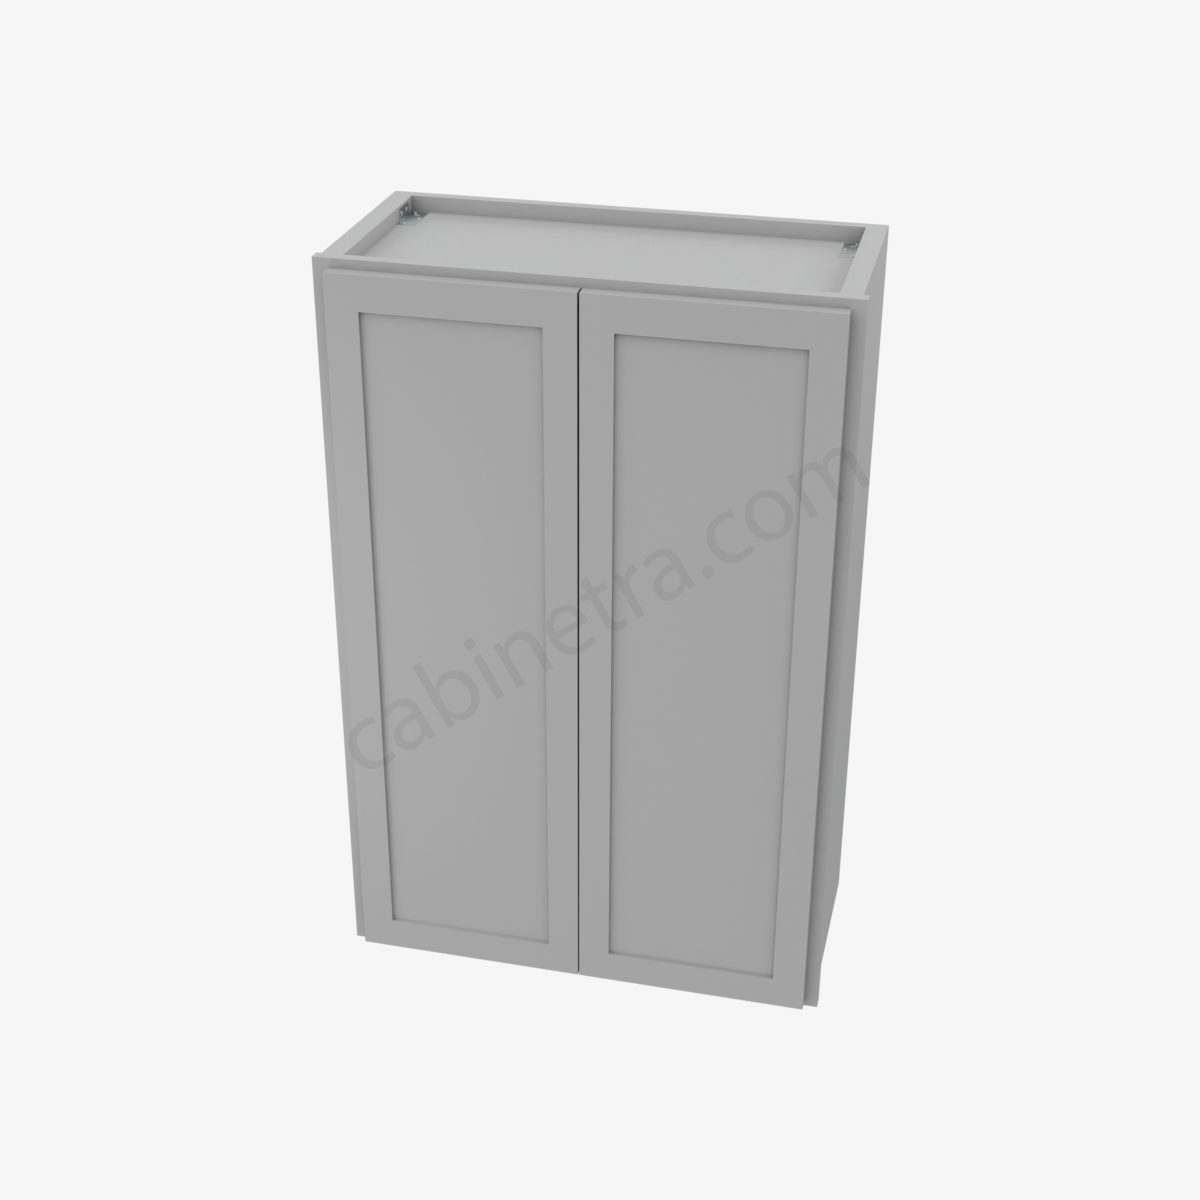 AB W2742B 3 Forevermark Lait Gray Shaker Cabinetra scaled